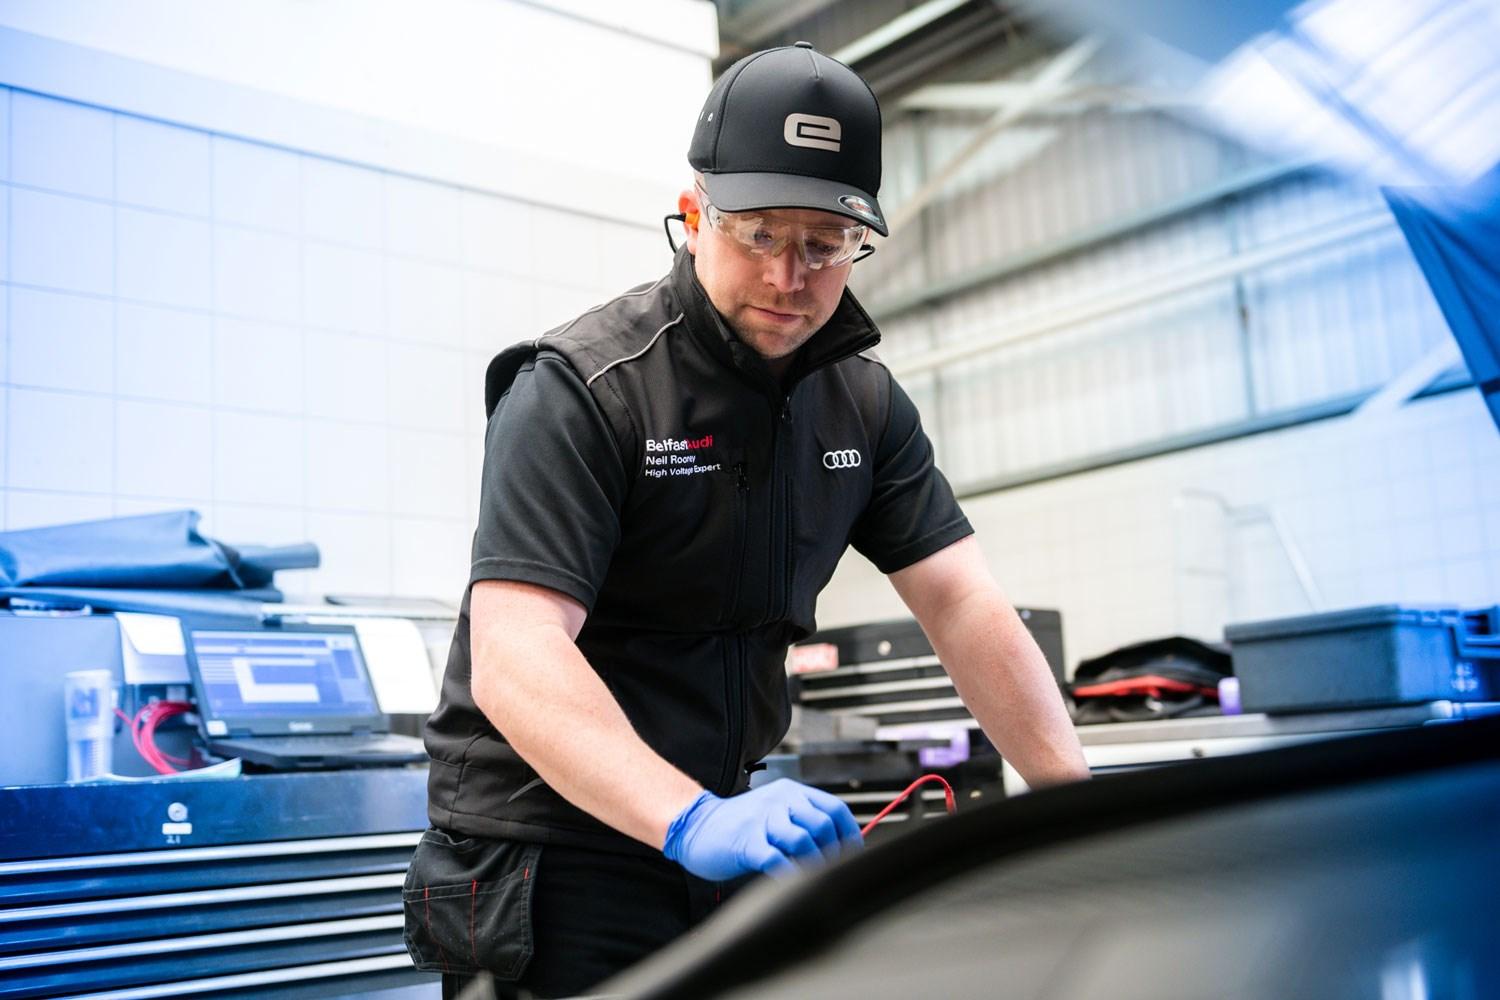 Audi Repair Specialist checks under the hood of Audi vehicle during service at Belfast Audi